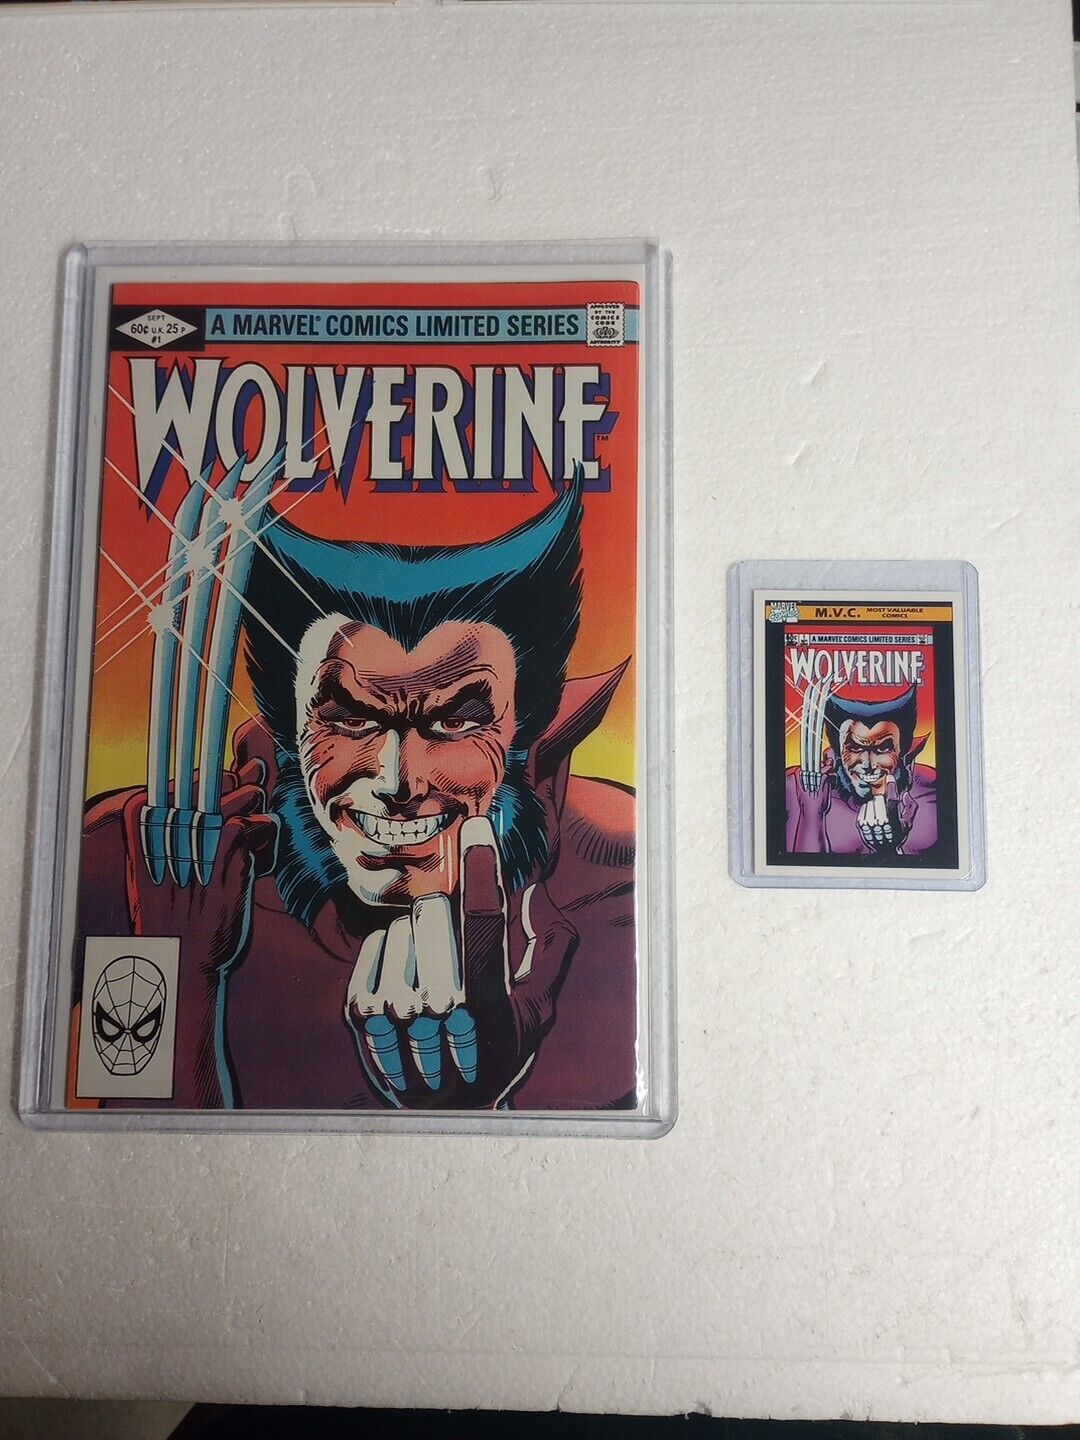 Wolverine #1 1982 Frank Miller With 1990 Impel #133 Most Valuable Comics Card